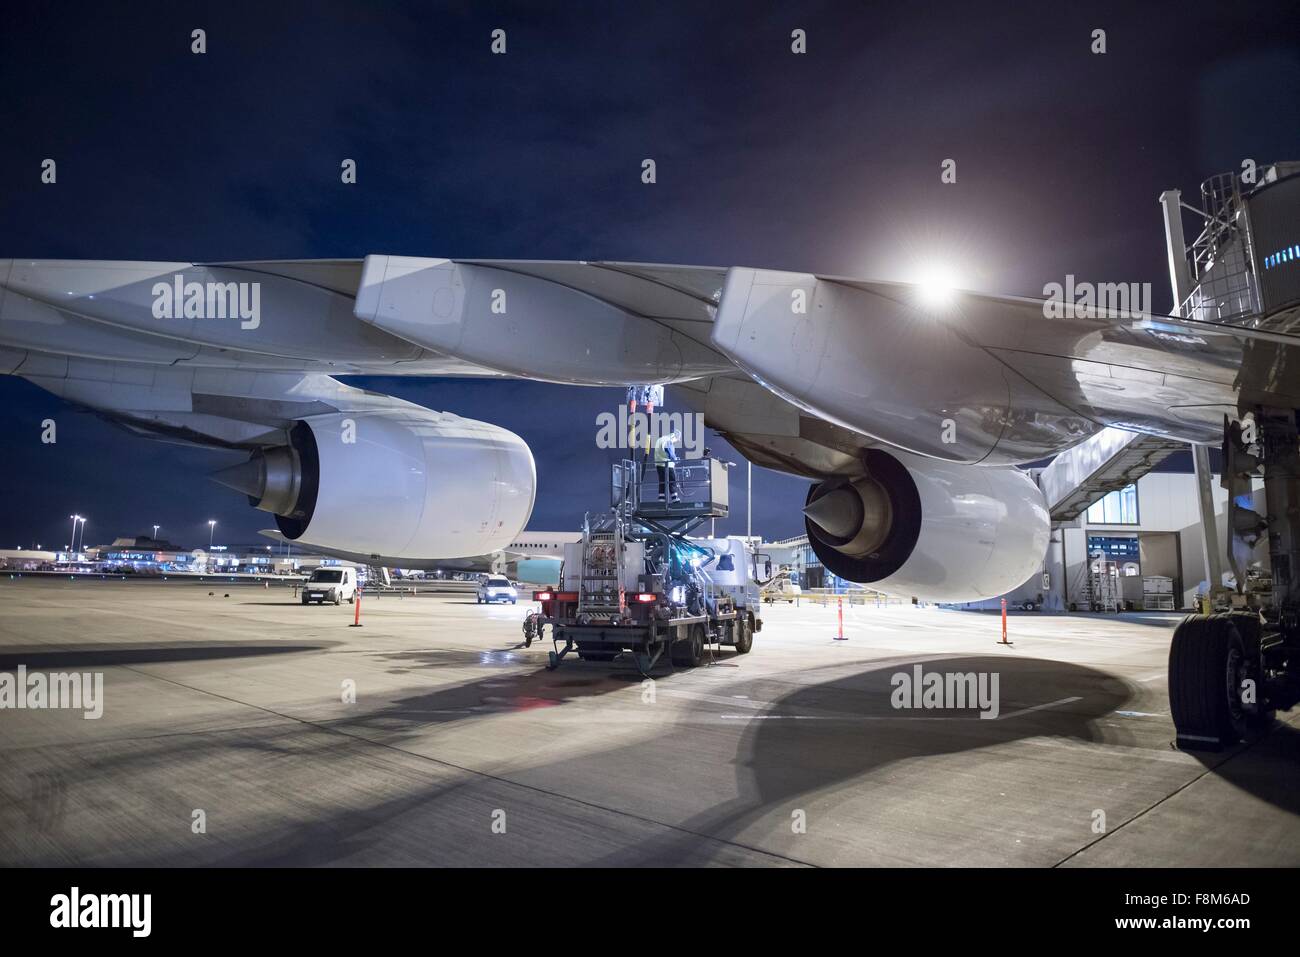 Refuelling A380 aircraft on runway at night Stock Photo